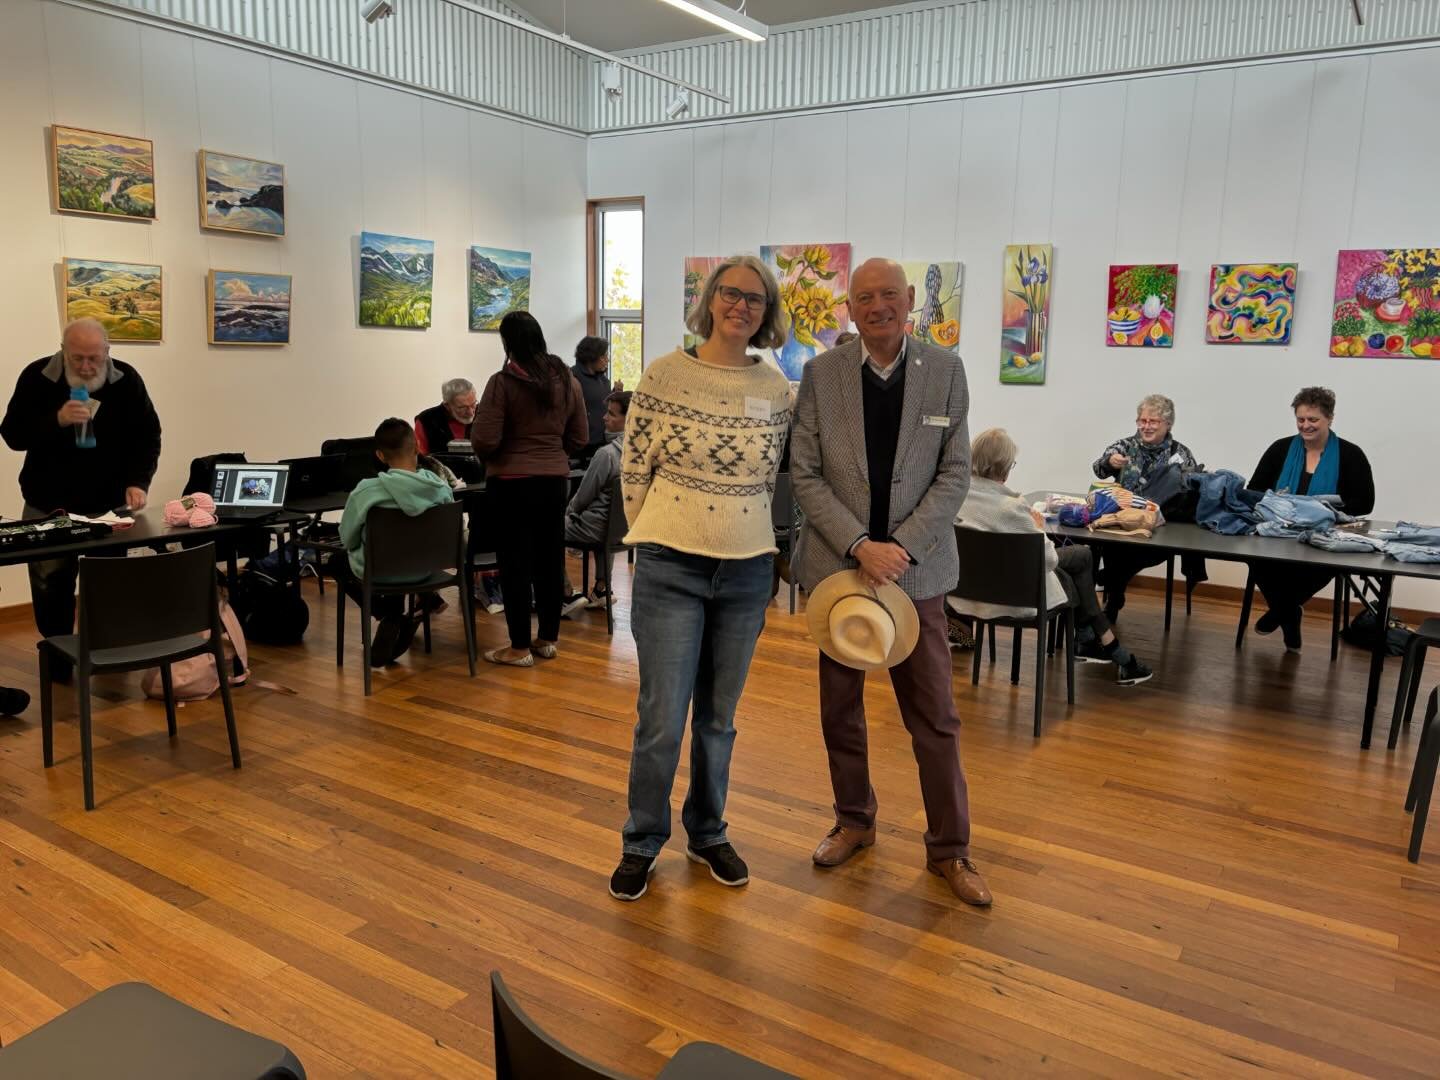 Well done to Kirsten and team on another successful Repair Cafe at Ginninderry at Ginninderry Community today. Clothing, electricals and even a DJ mixing board were subject of careful scrutiny and repair.

Please check their Facebook page above for d